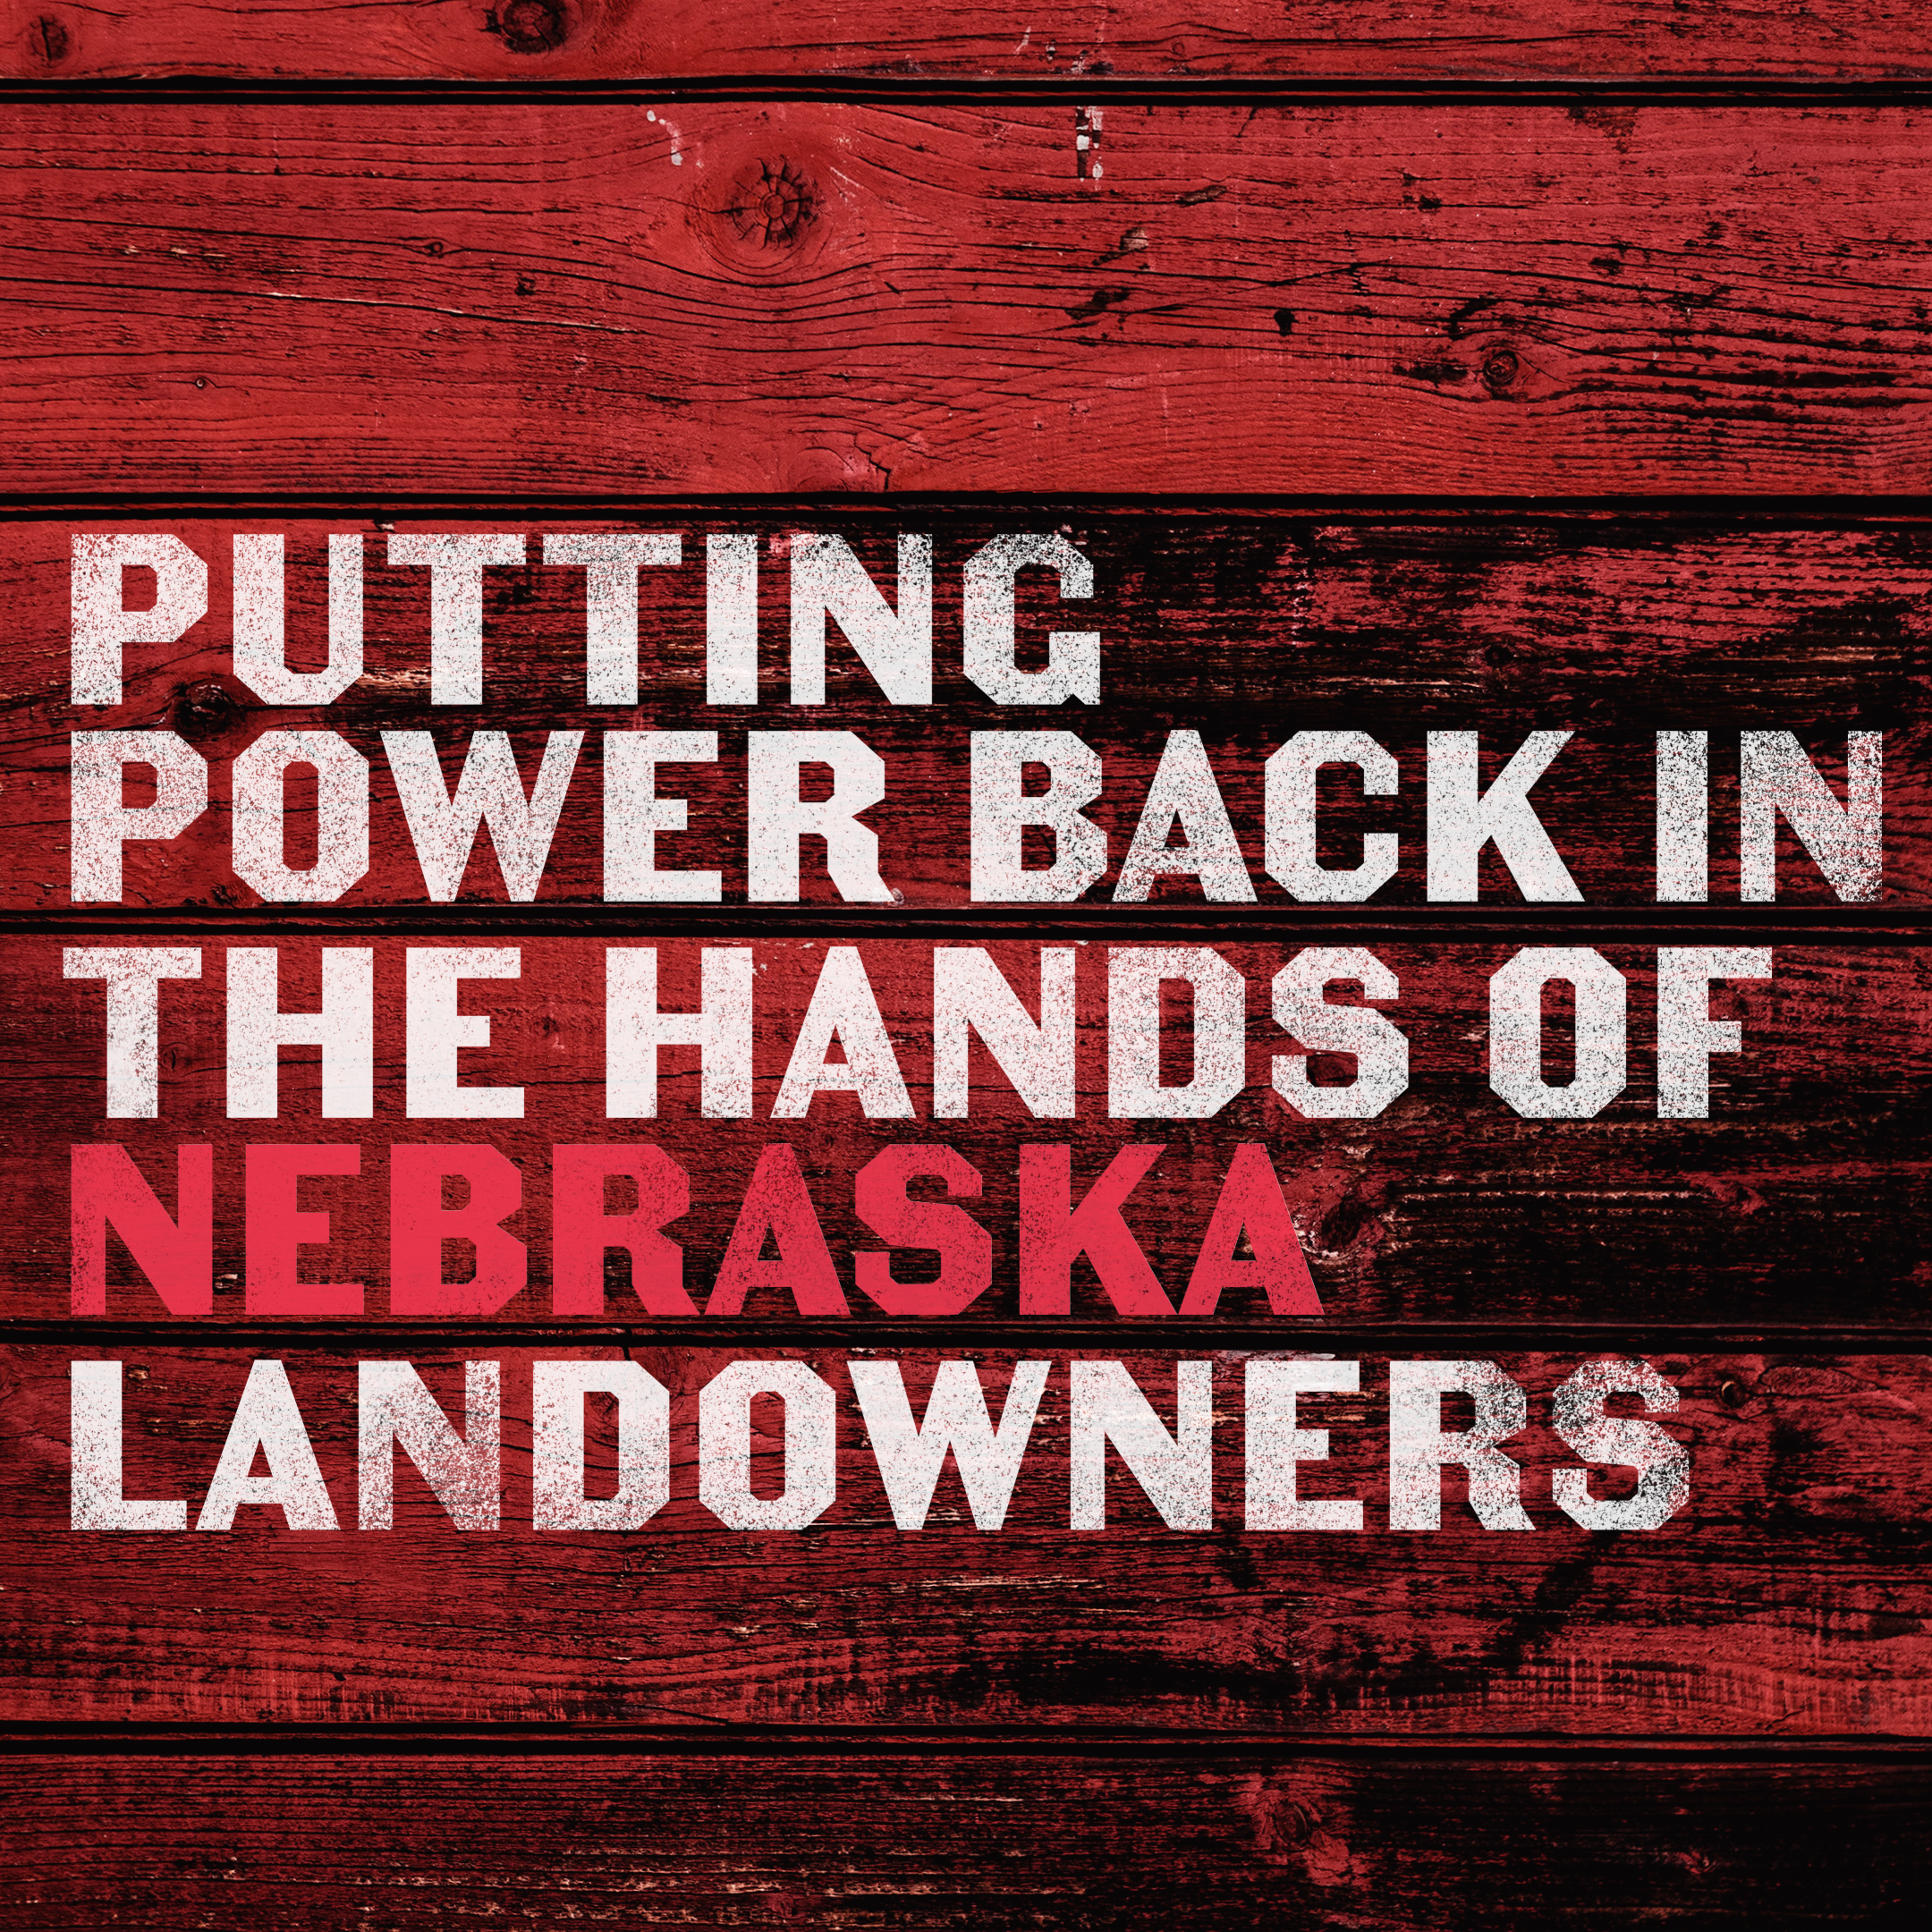 Red barn wood with white text PUTTING THE POWER BACK IN THE HANDS OF NEBRASKA LANDOWNERS.